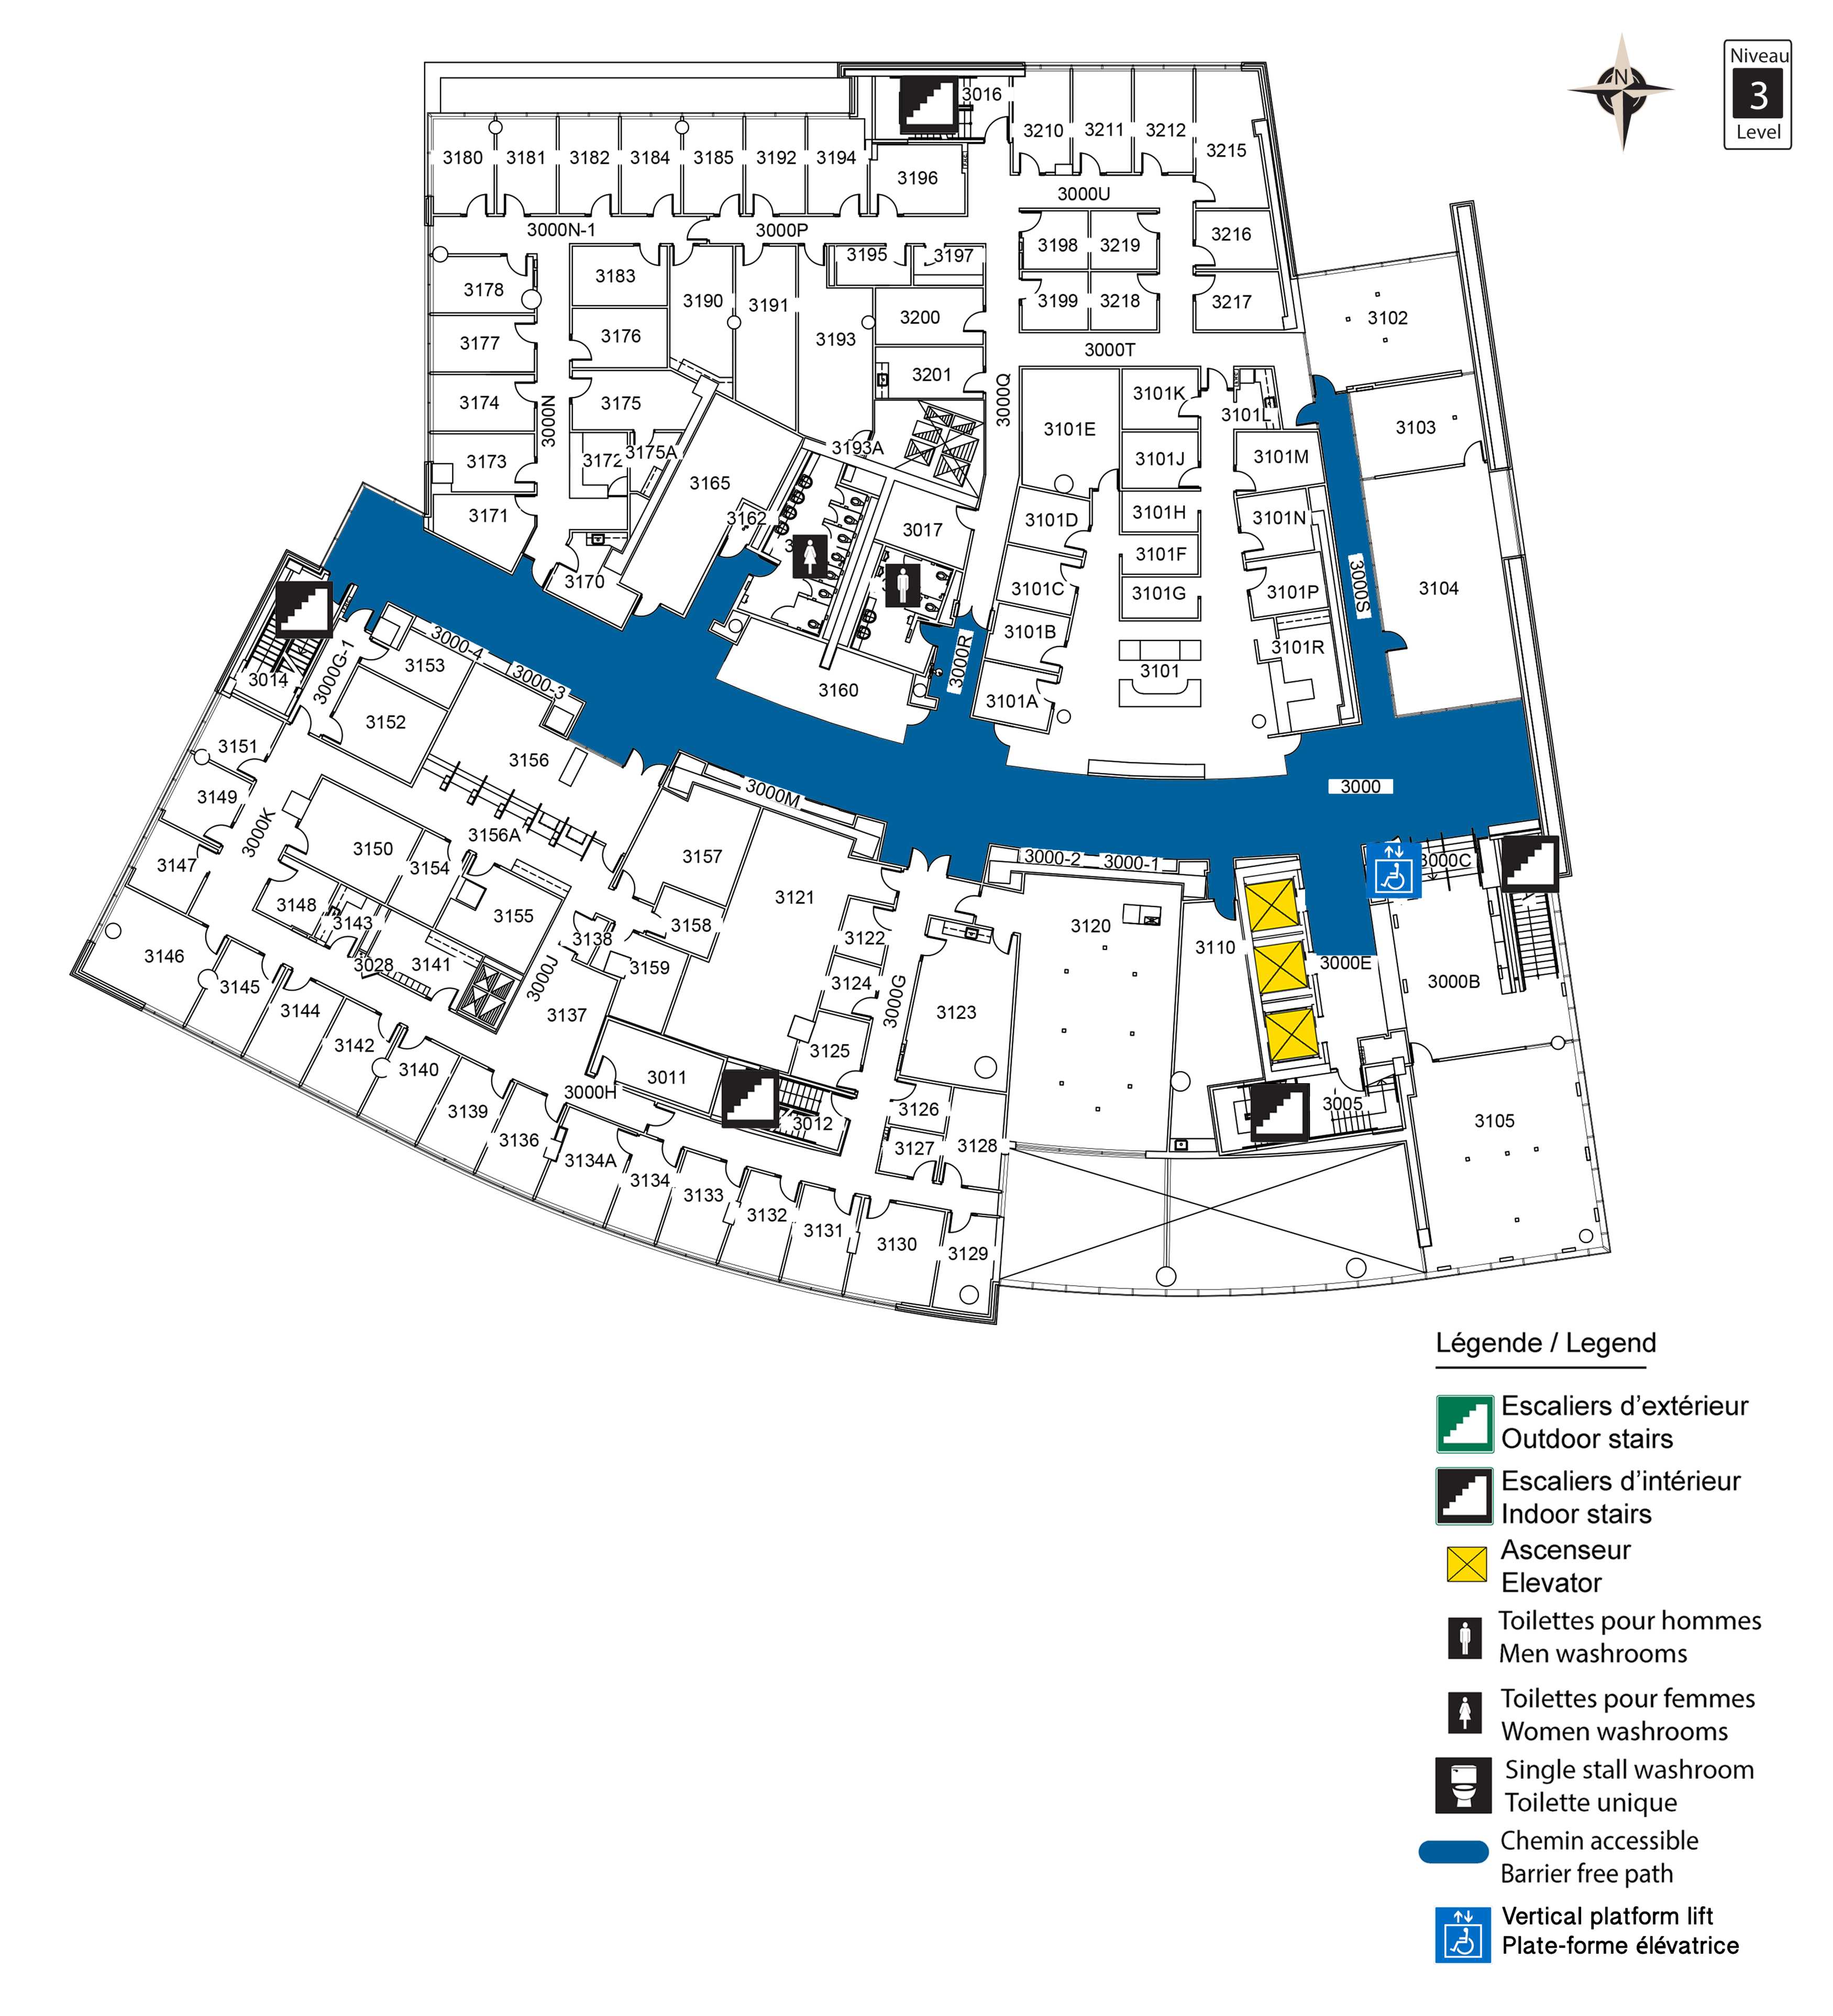 Accessible map - DMS level 3